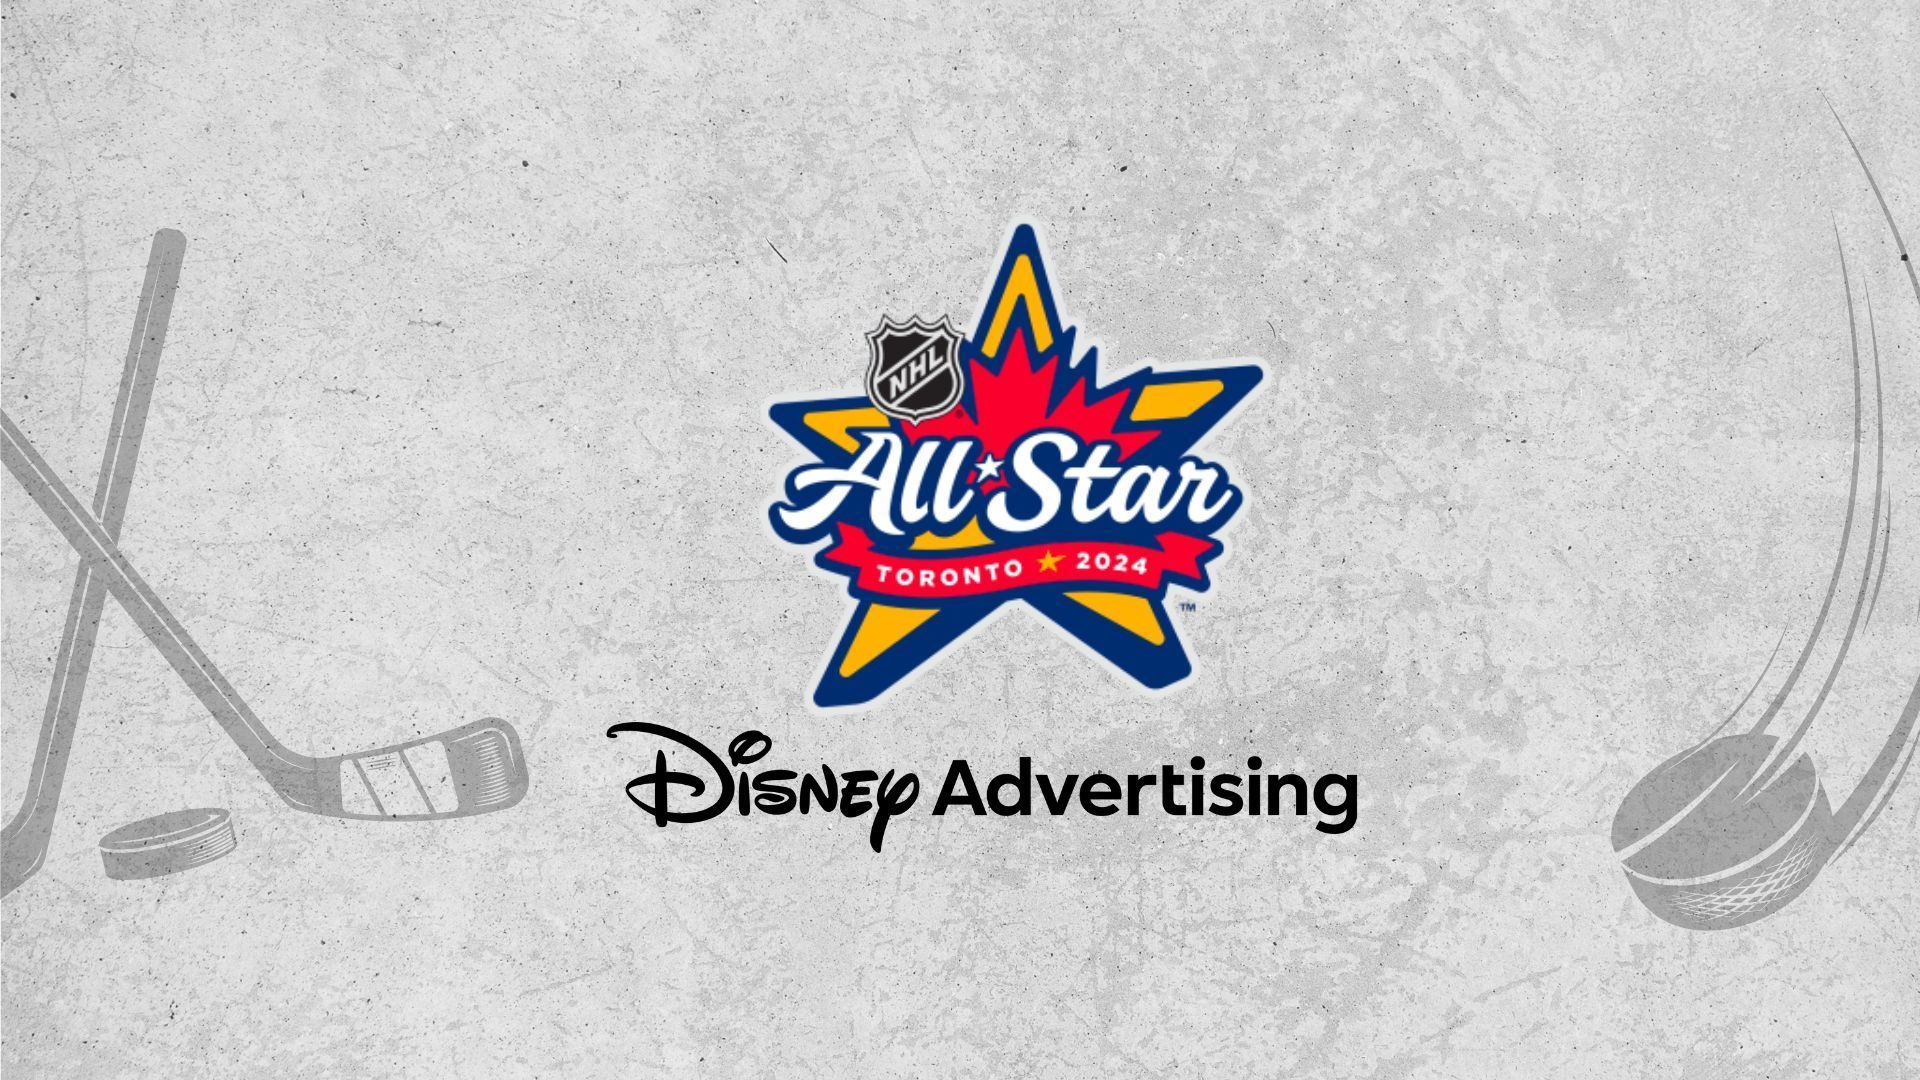 Disney's Sold-Out NHL All-Star Weekend